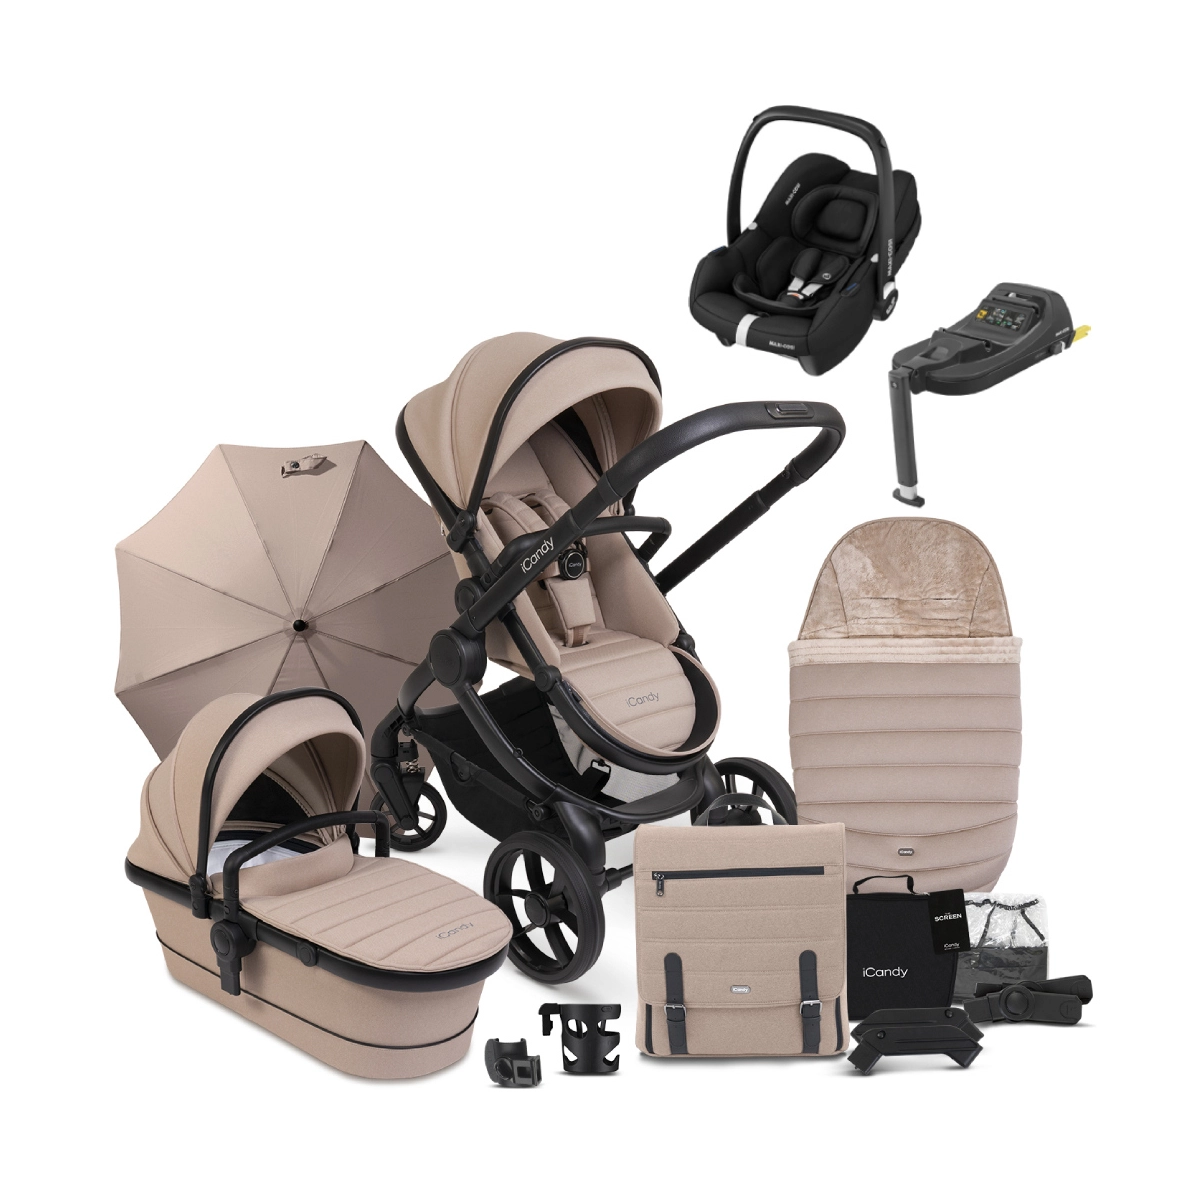 Image of iCandy Peach 7 Maxi Cosi Cabriofix i-Size Complete Travel System Bundle - Cookie + Free Parvel Go Motion Sensor worth £69.99